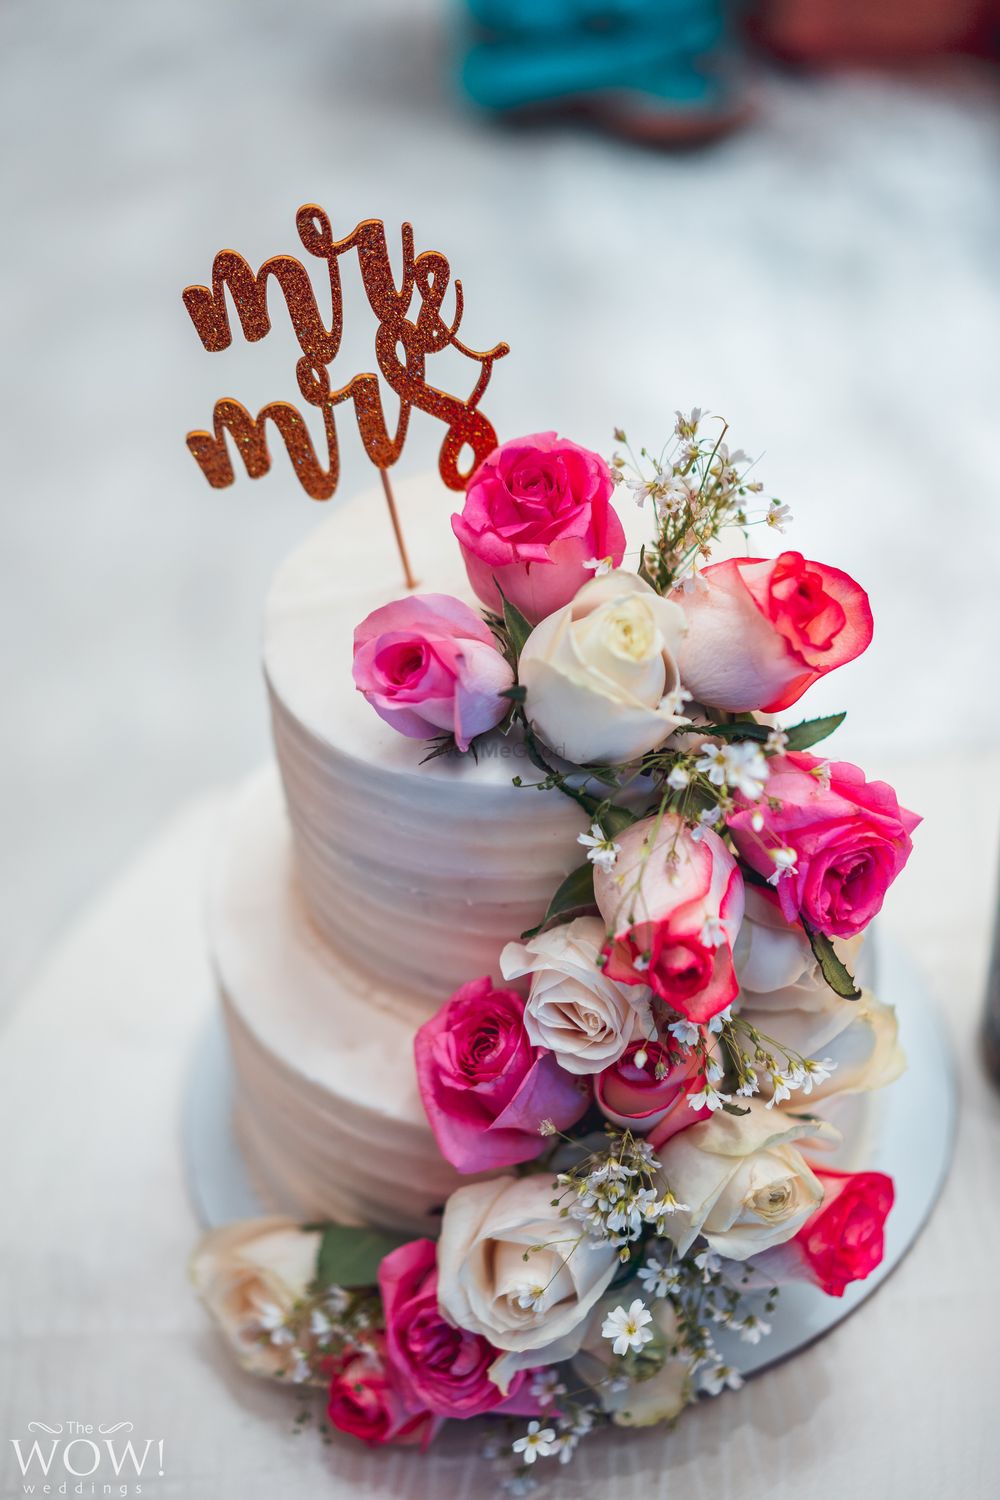 Photo of Floral wedding cake with mr and mrs cake topper